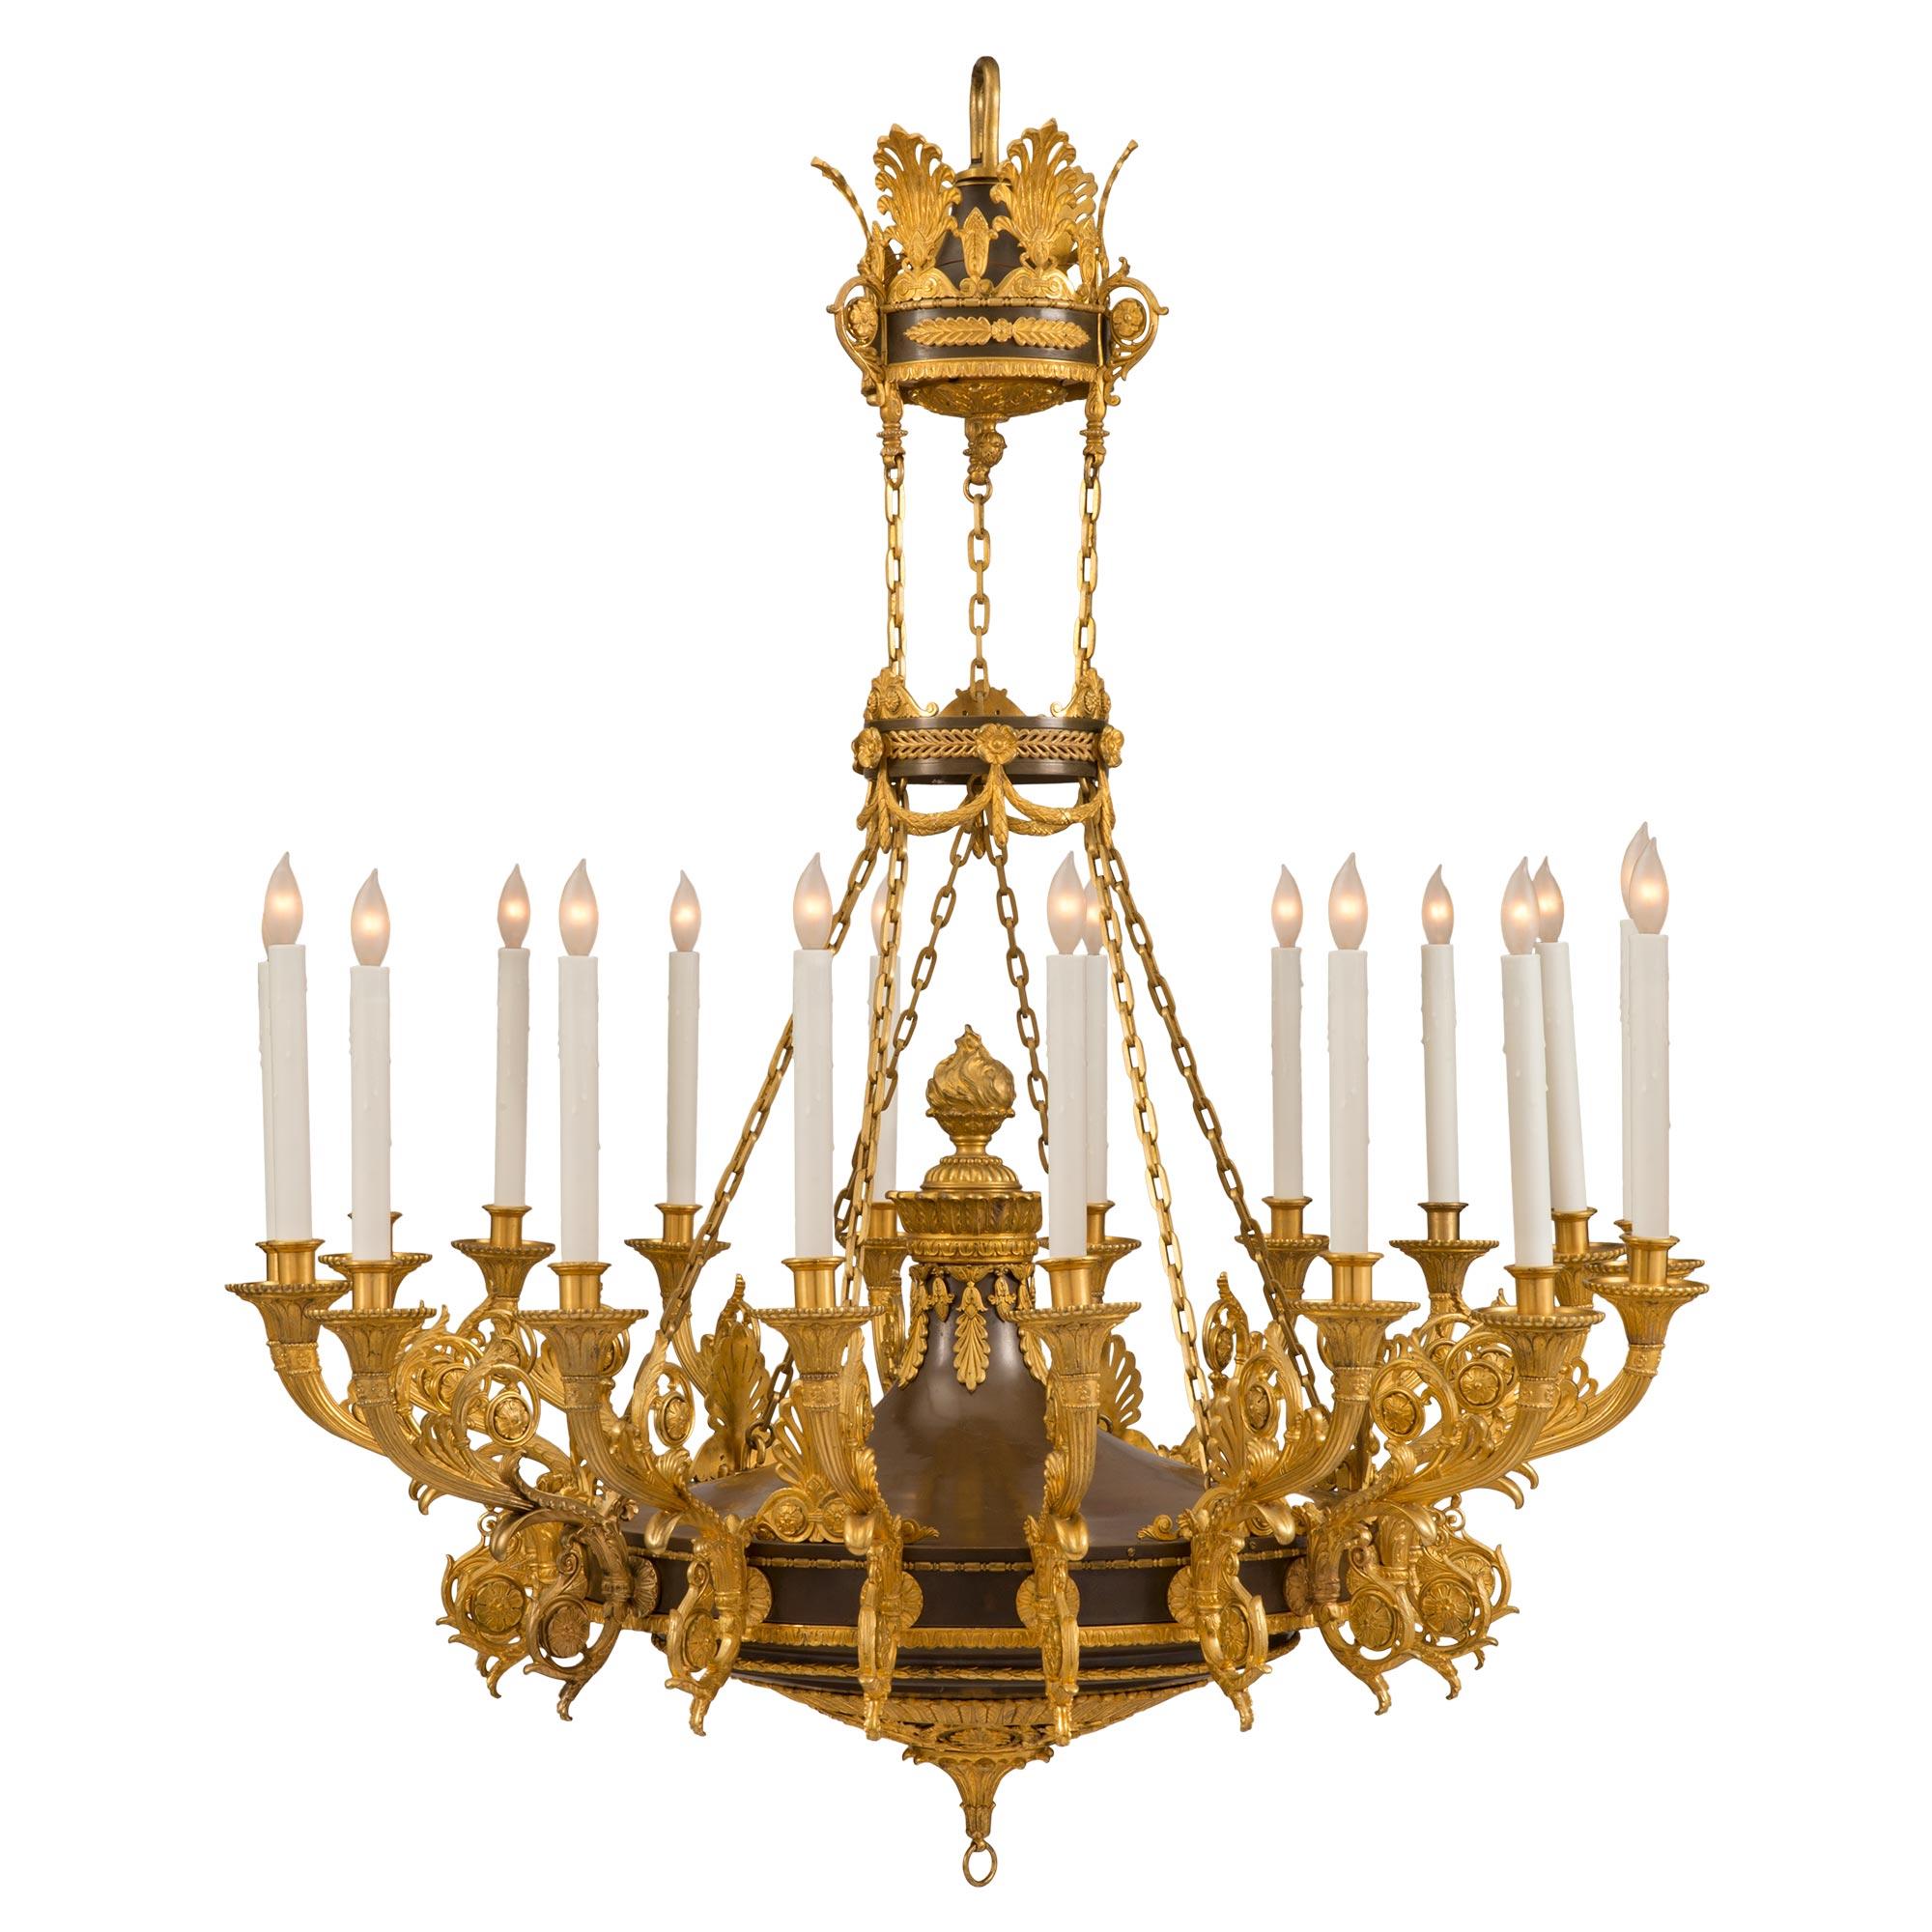 A sensational and most impressive Russian 19th century Empire st. patinated bronze and ormolu eighteen light chandelier. The chandelier is centered by a fine inverted bottom finial with elegant acanthus leaves and beautiful pierced ormolu palmettes.